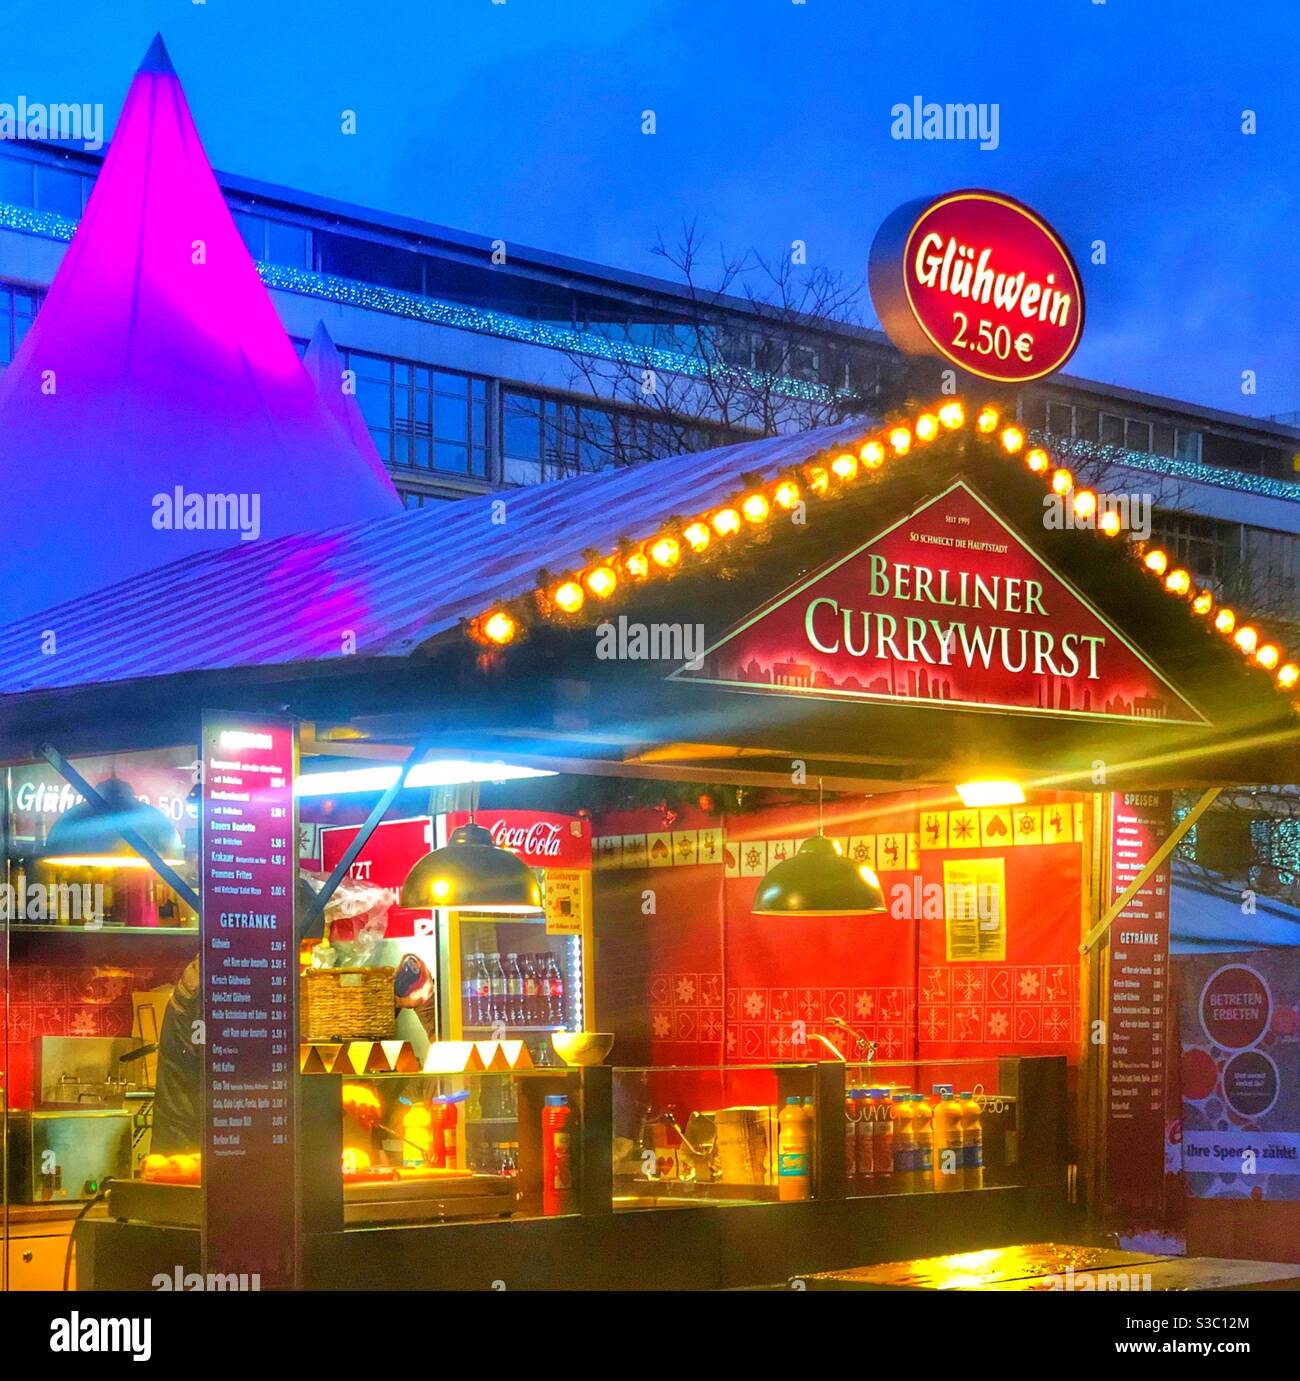 The Christmas market in Berlin Germany features food stalls with delicious specialties like Berliner Currywurst and gluhwein. Currywurst is a hot dog with spicy sauce & gluhwein is hot mulled wine. Stock Photo